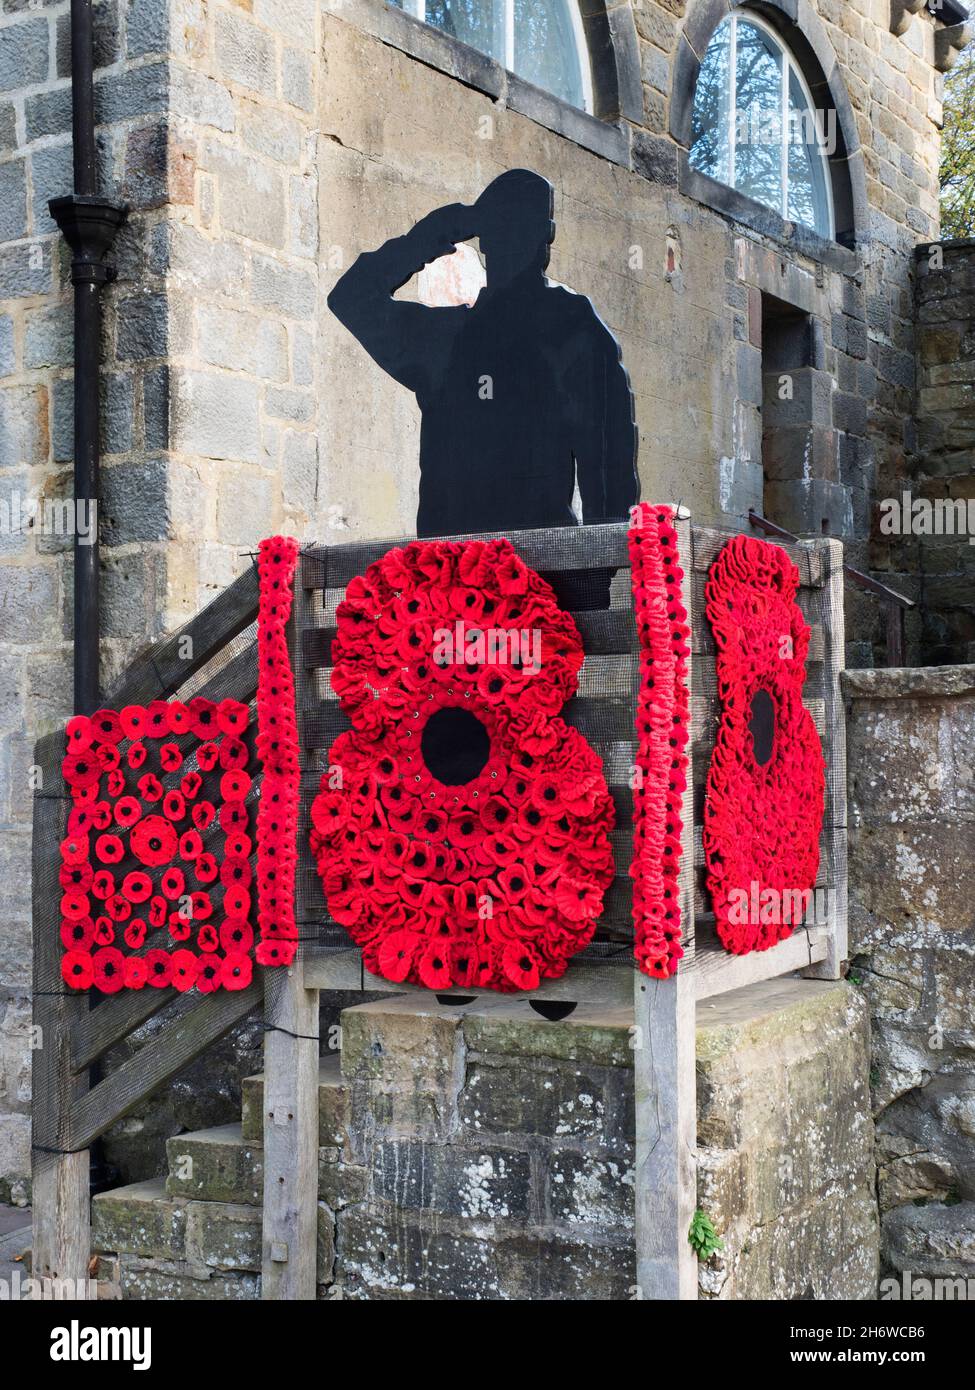 Poppy display marking the 100th anniversary of the Royal British Legion in 2021 at the Castle in  Knaresborough Yorkshire England Stock Photo